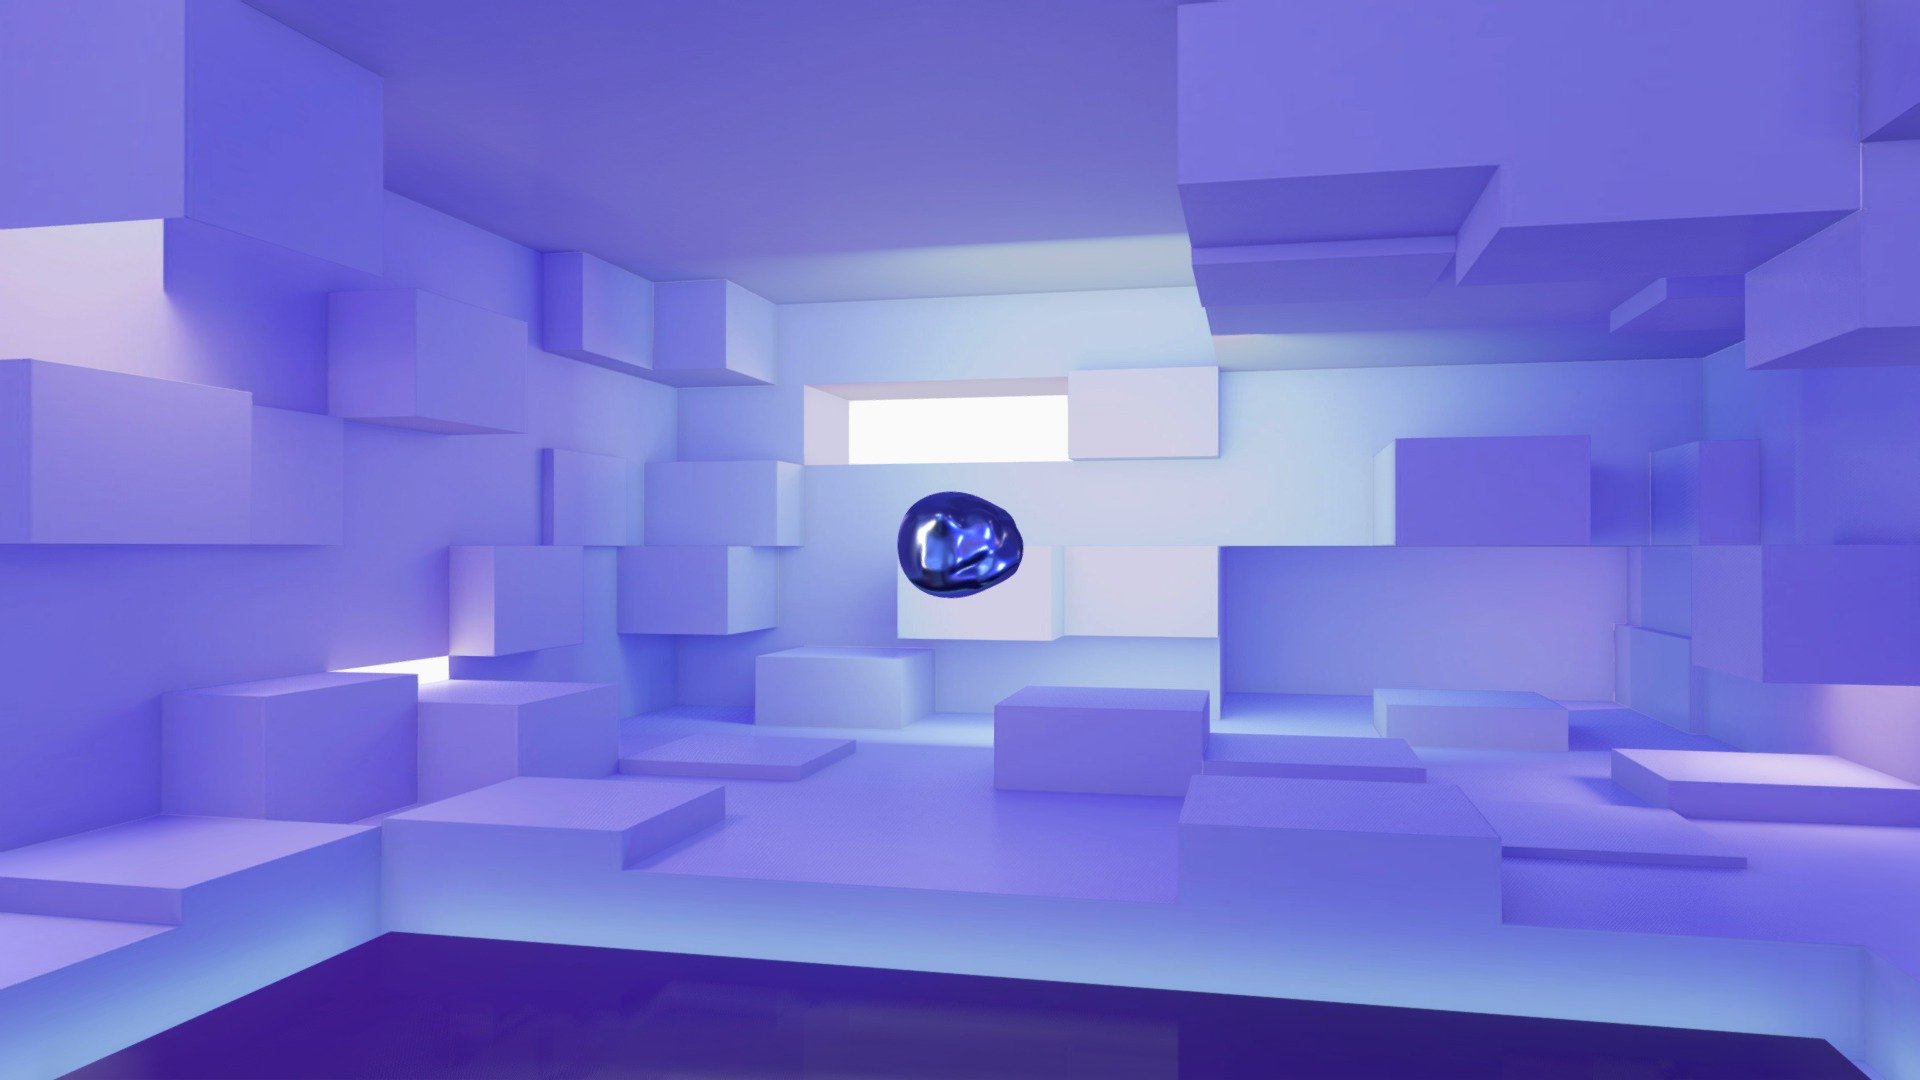 A room space filled with purple-colored boxes decorations, designed in a futuristic style
Good for holding online activities or exhibitions




Scaled in real world dimensions

Lighting and shadows baked
 - Fantasy Space | Purple Interior | Baked - Buy Royalty Free 3D model by ChristyHsu (@ida61xq) 3d model